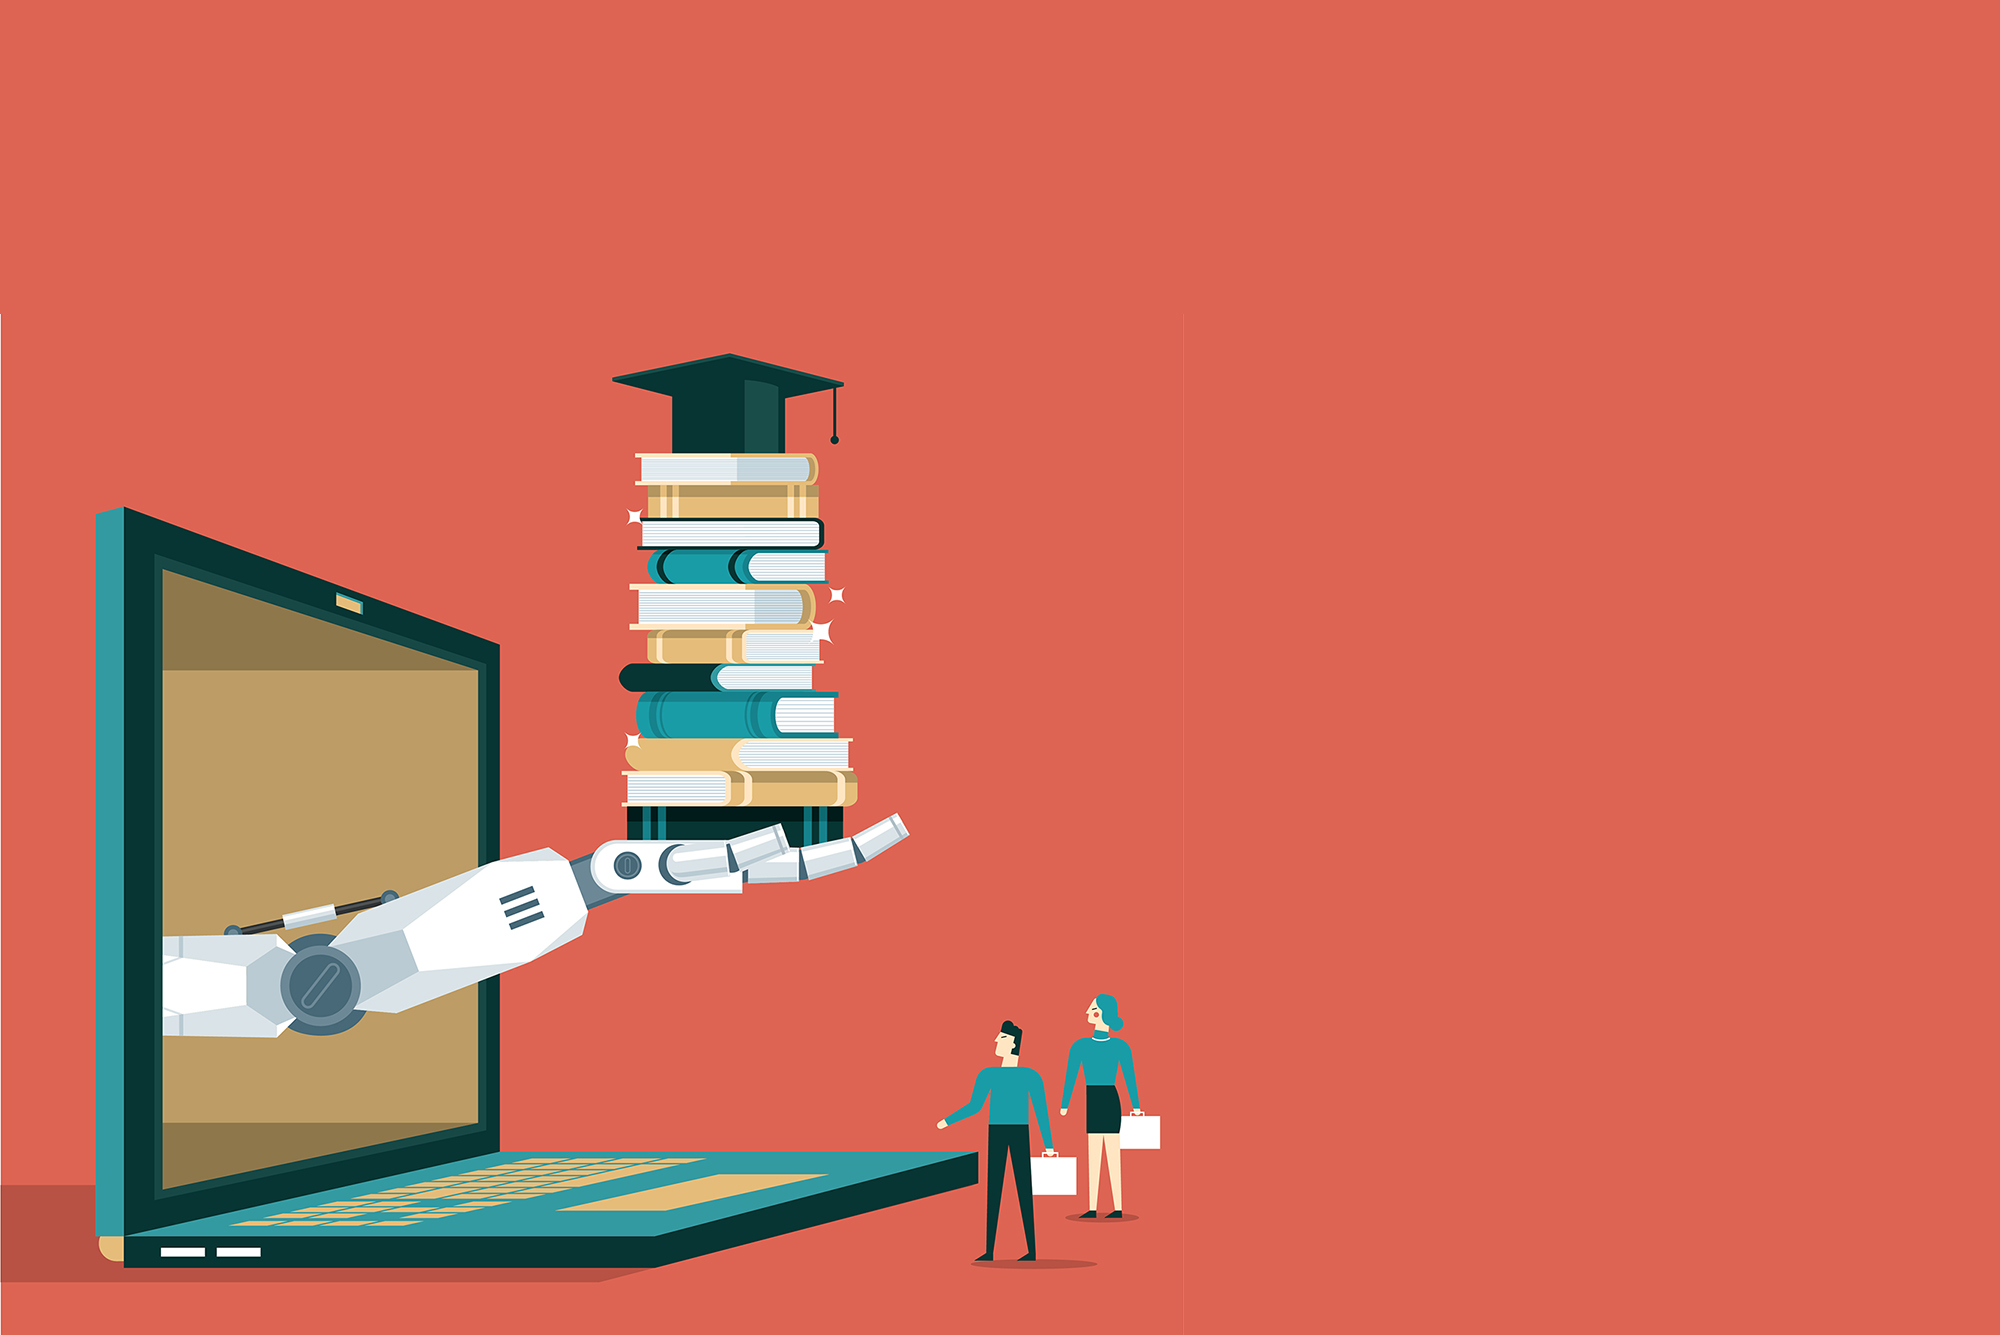 Photo: An illustration of a robot arm reaching out of a laptop holding a stack of books and a graduation cap. Two people stand next to the laptop looking at the arm